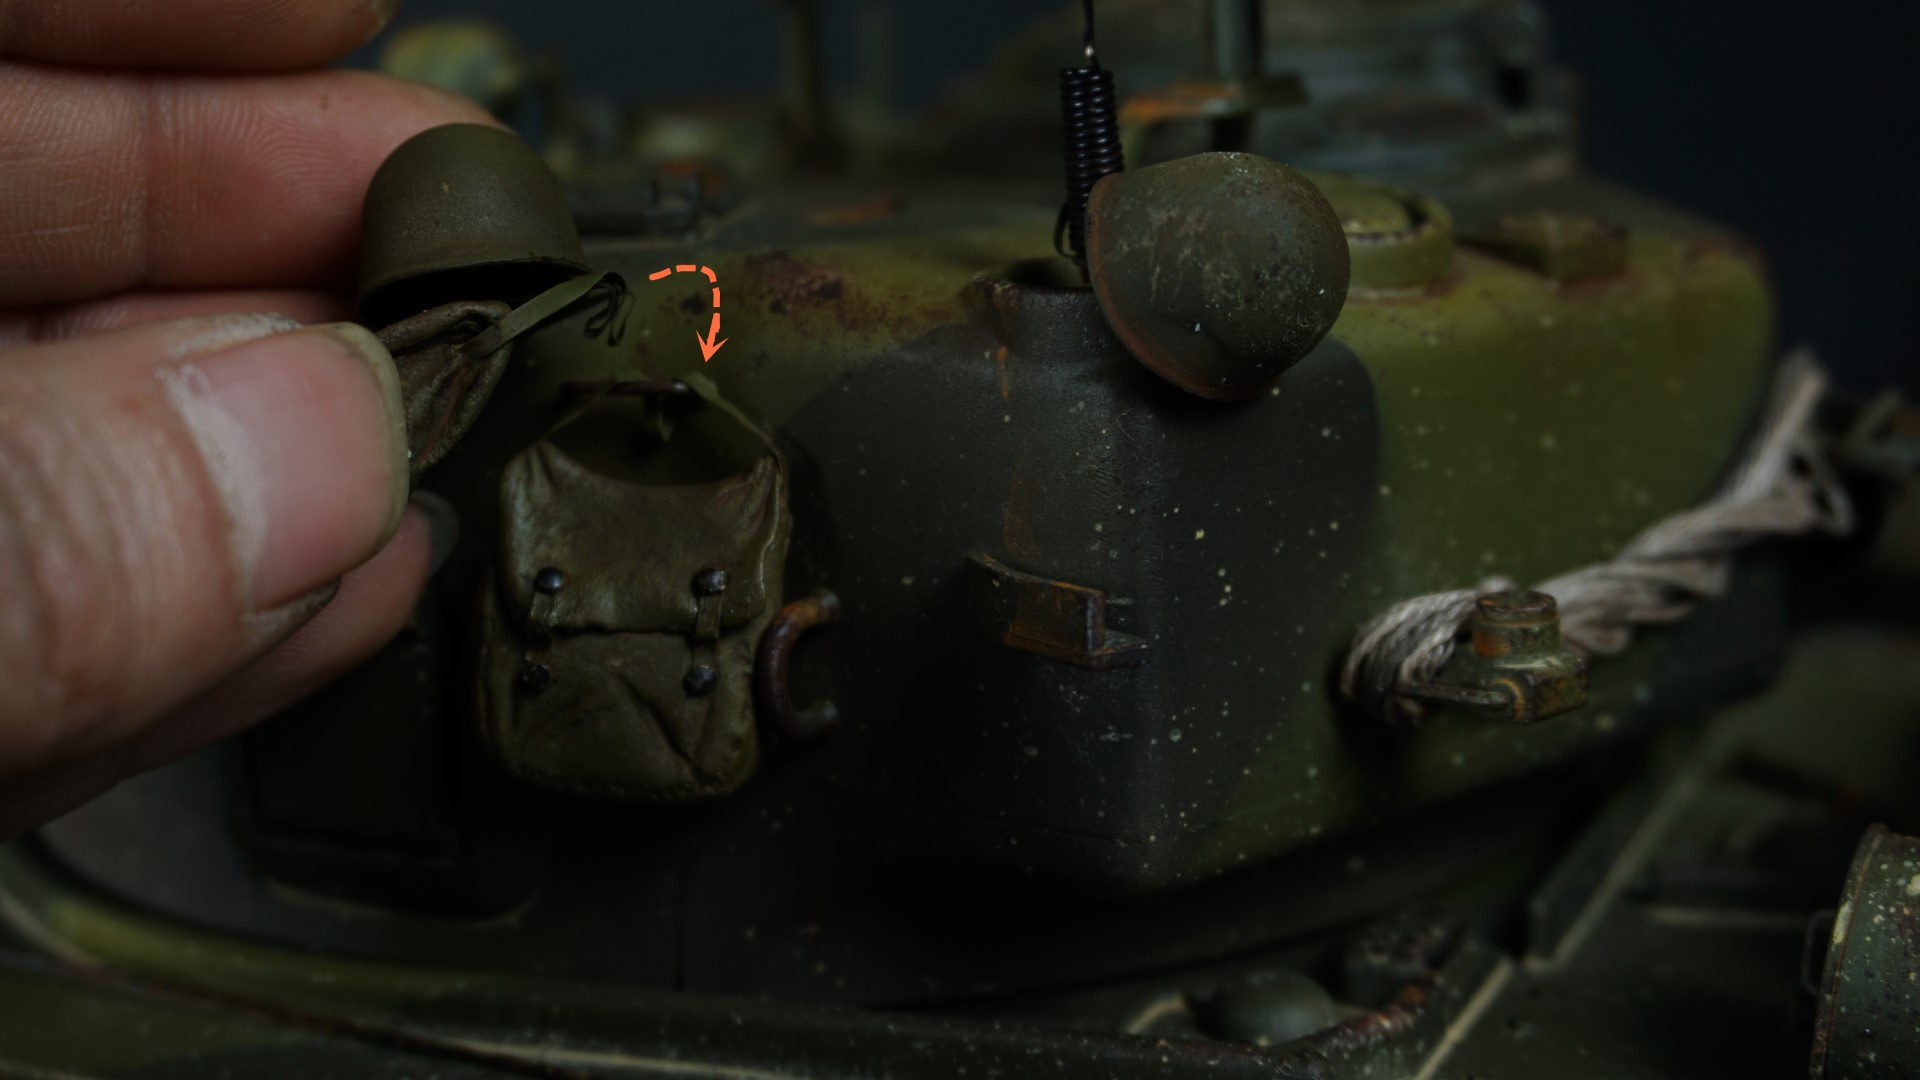 How to add Tank Accessory set for Custom paint & Weathering M4A3E8 SHERMAN "FURY" RC Tank